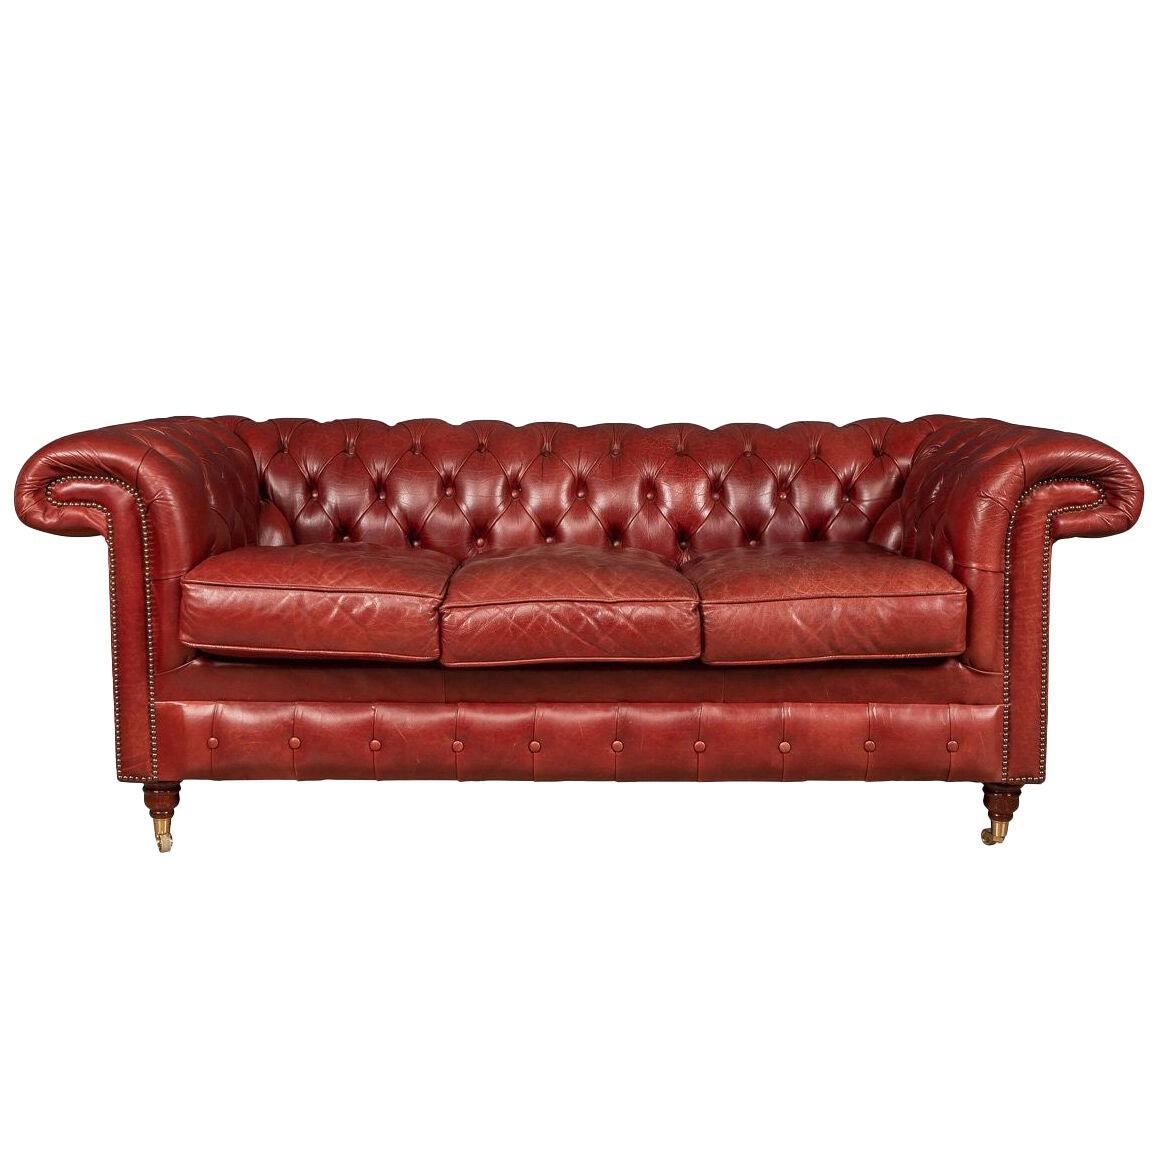 Superb 20th Century Chesterfield Three Seater Leather Sofa C.1980